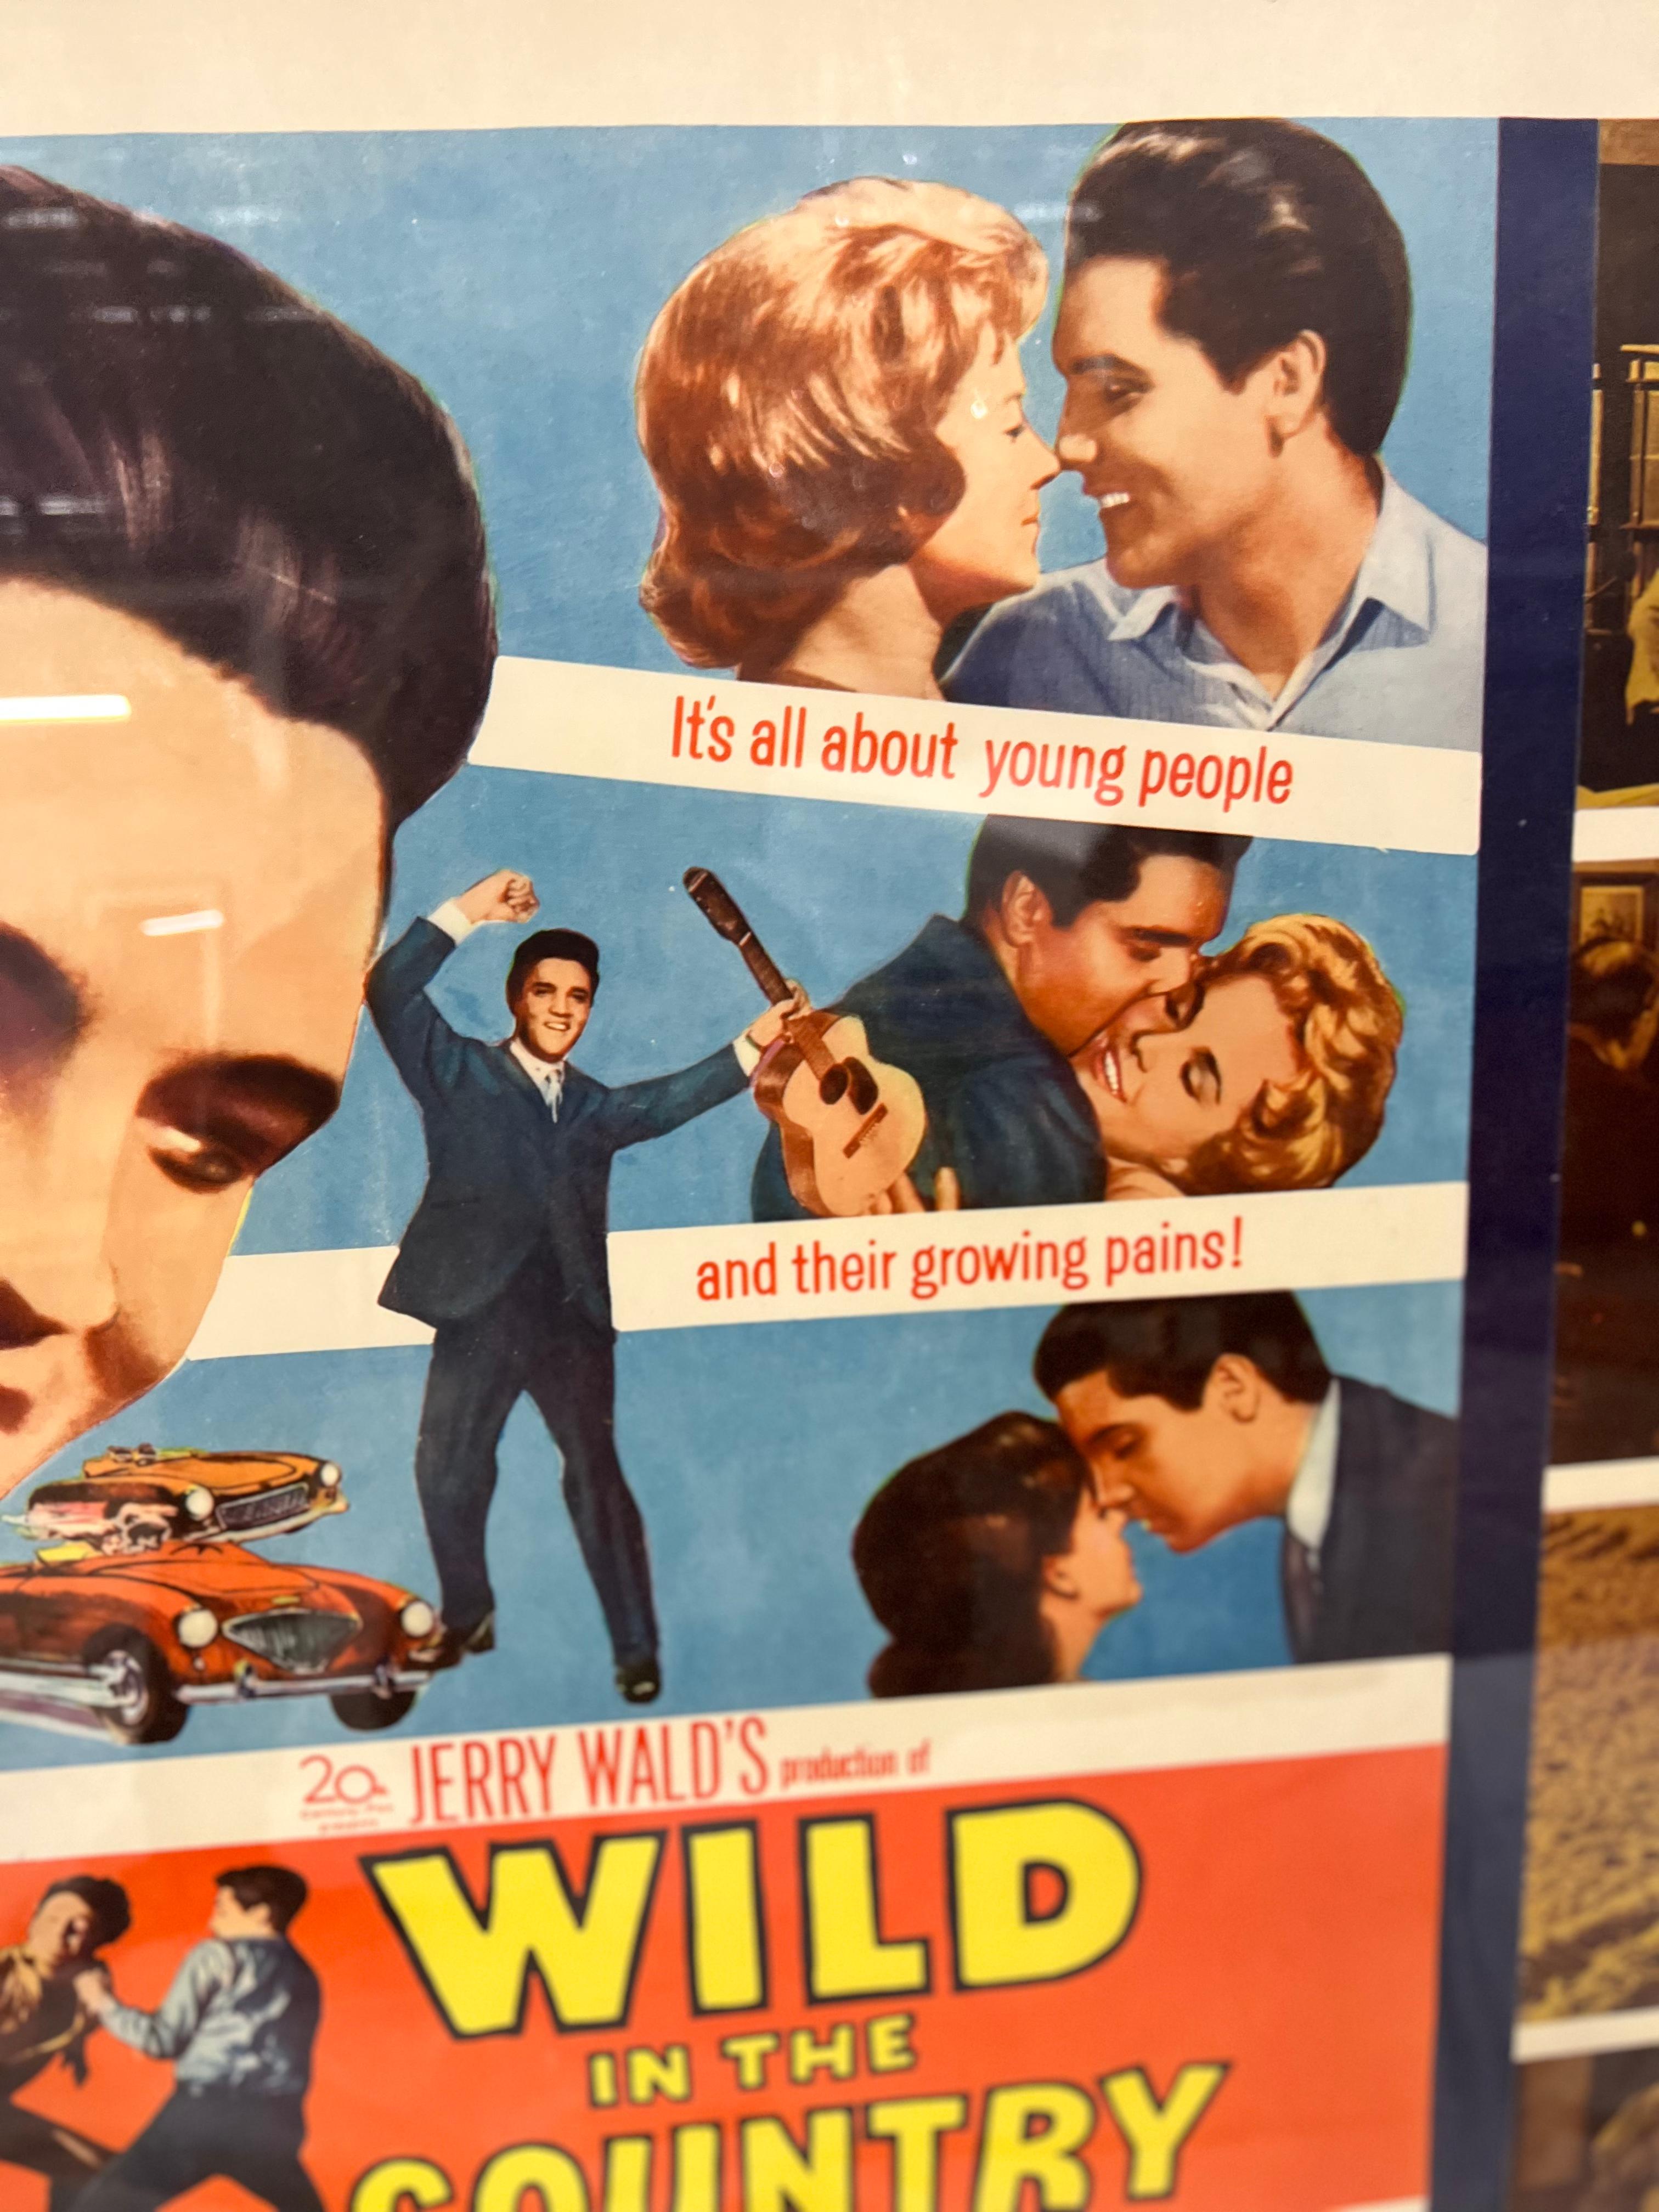 Dimensions with frame: 36″ x 30″
Medium: Original Offset Lithograph Vintage Poster

c. 1961

An Original Vintage American Unfolded Half-Sheet Movie Poster. Wild in the Country is a 1961 American drama film directed by Philip Dunne and starring Elvis